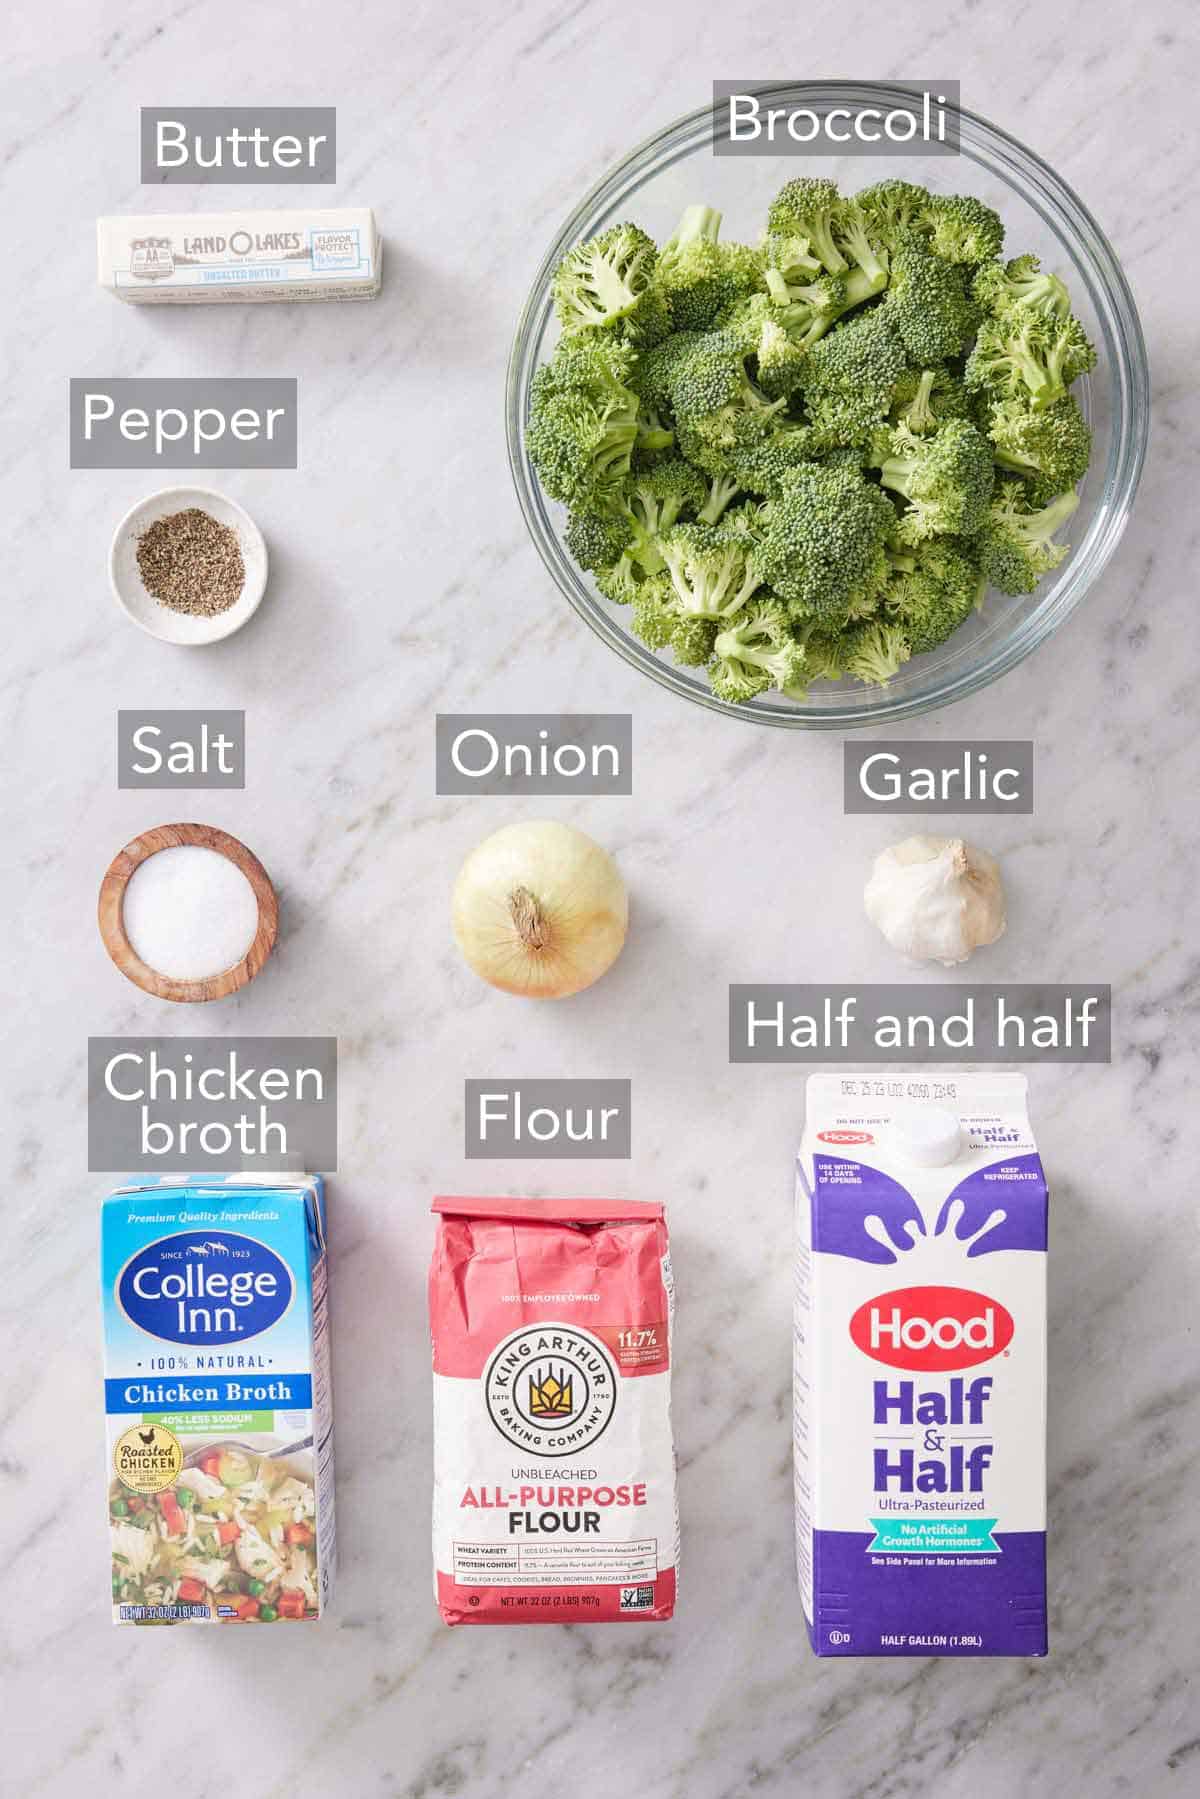 Ingredients needed to make cream of broccoli soup.